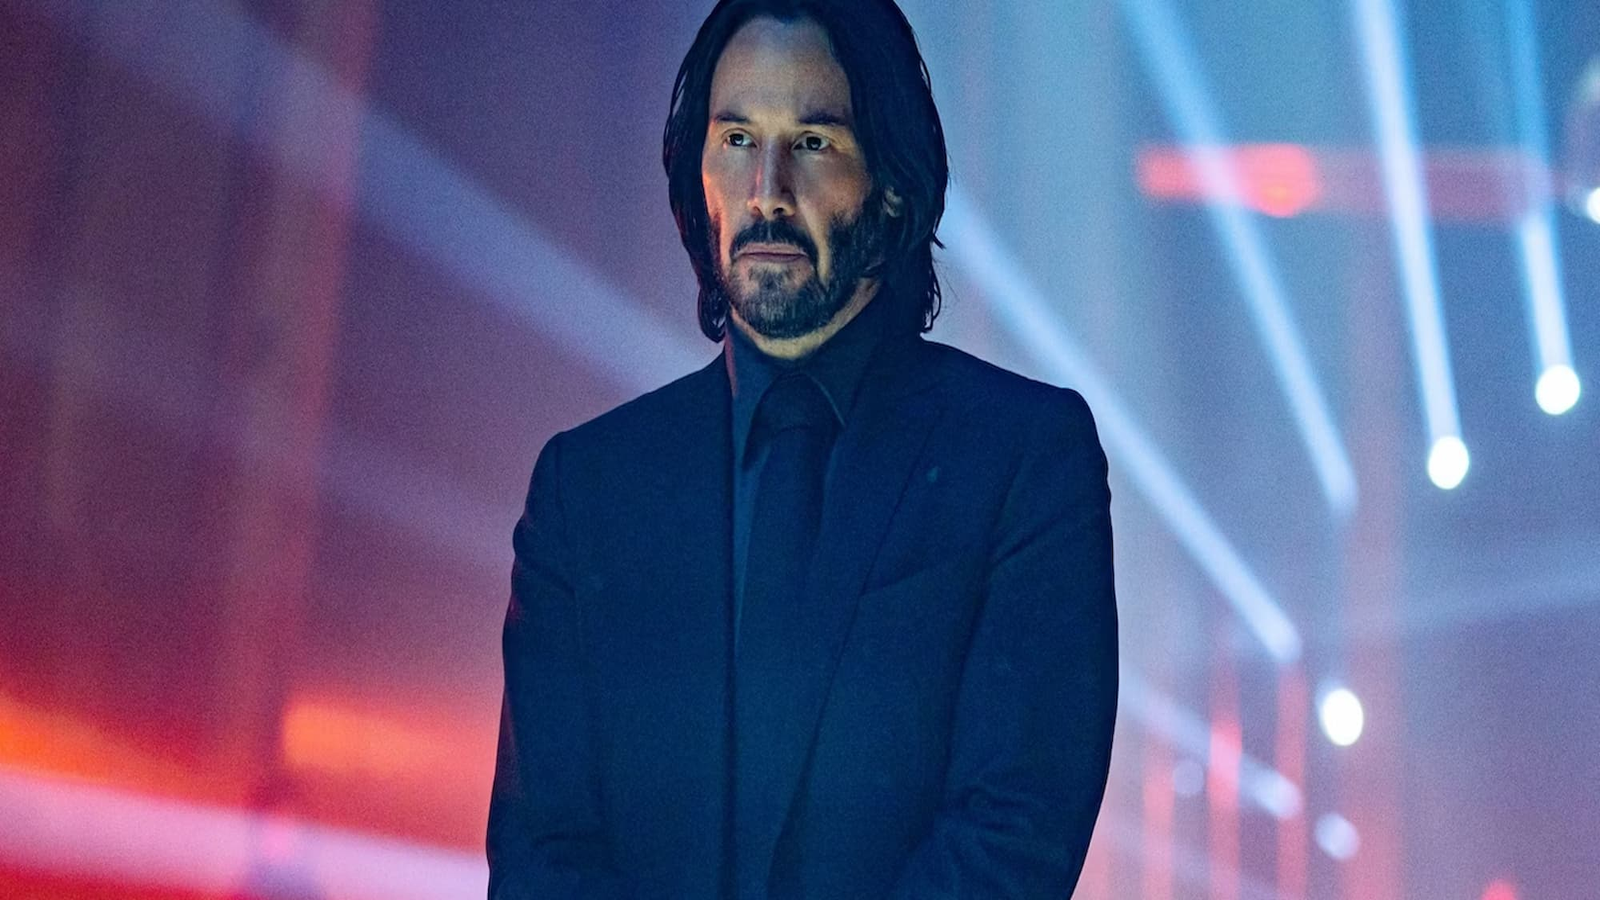 John Wick: A handy guide to who's who in the franchise